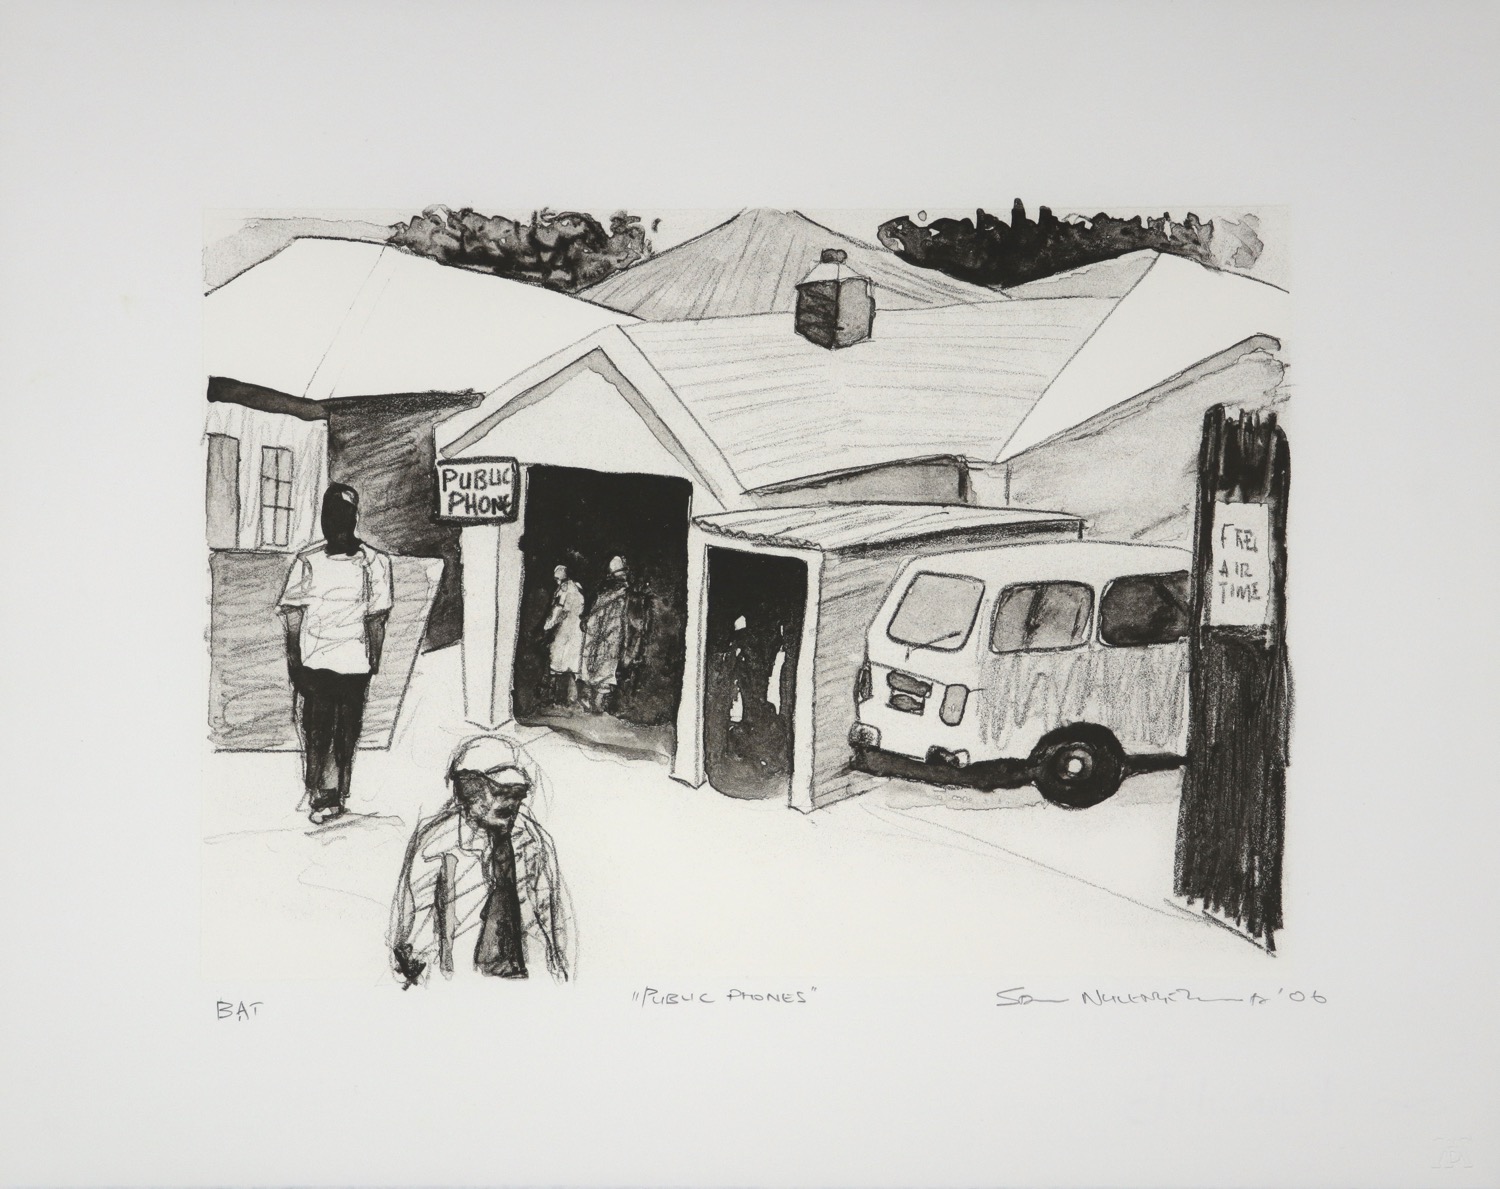 Monochromatic litho of a home garage based public phone service in a South African township